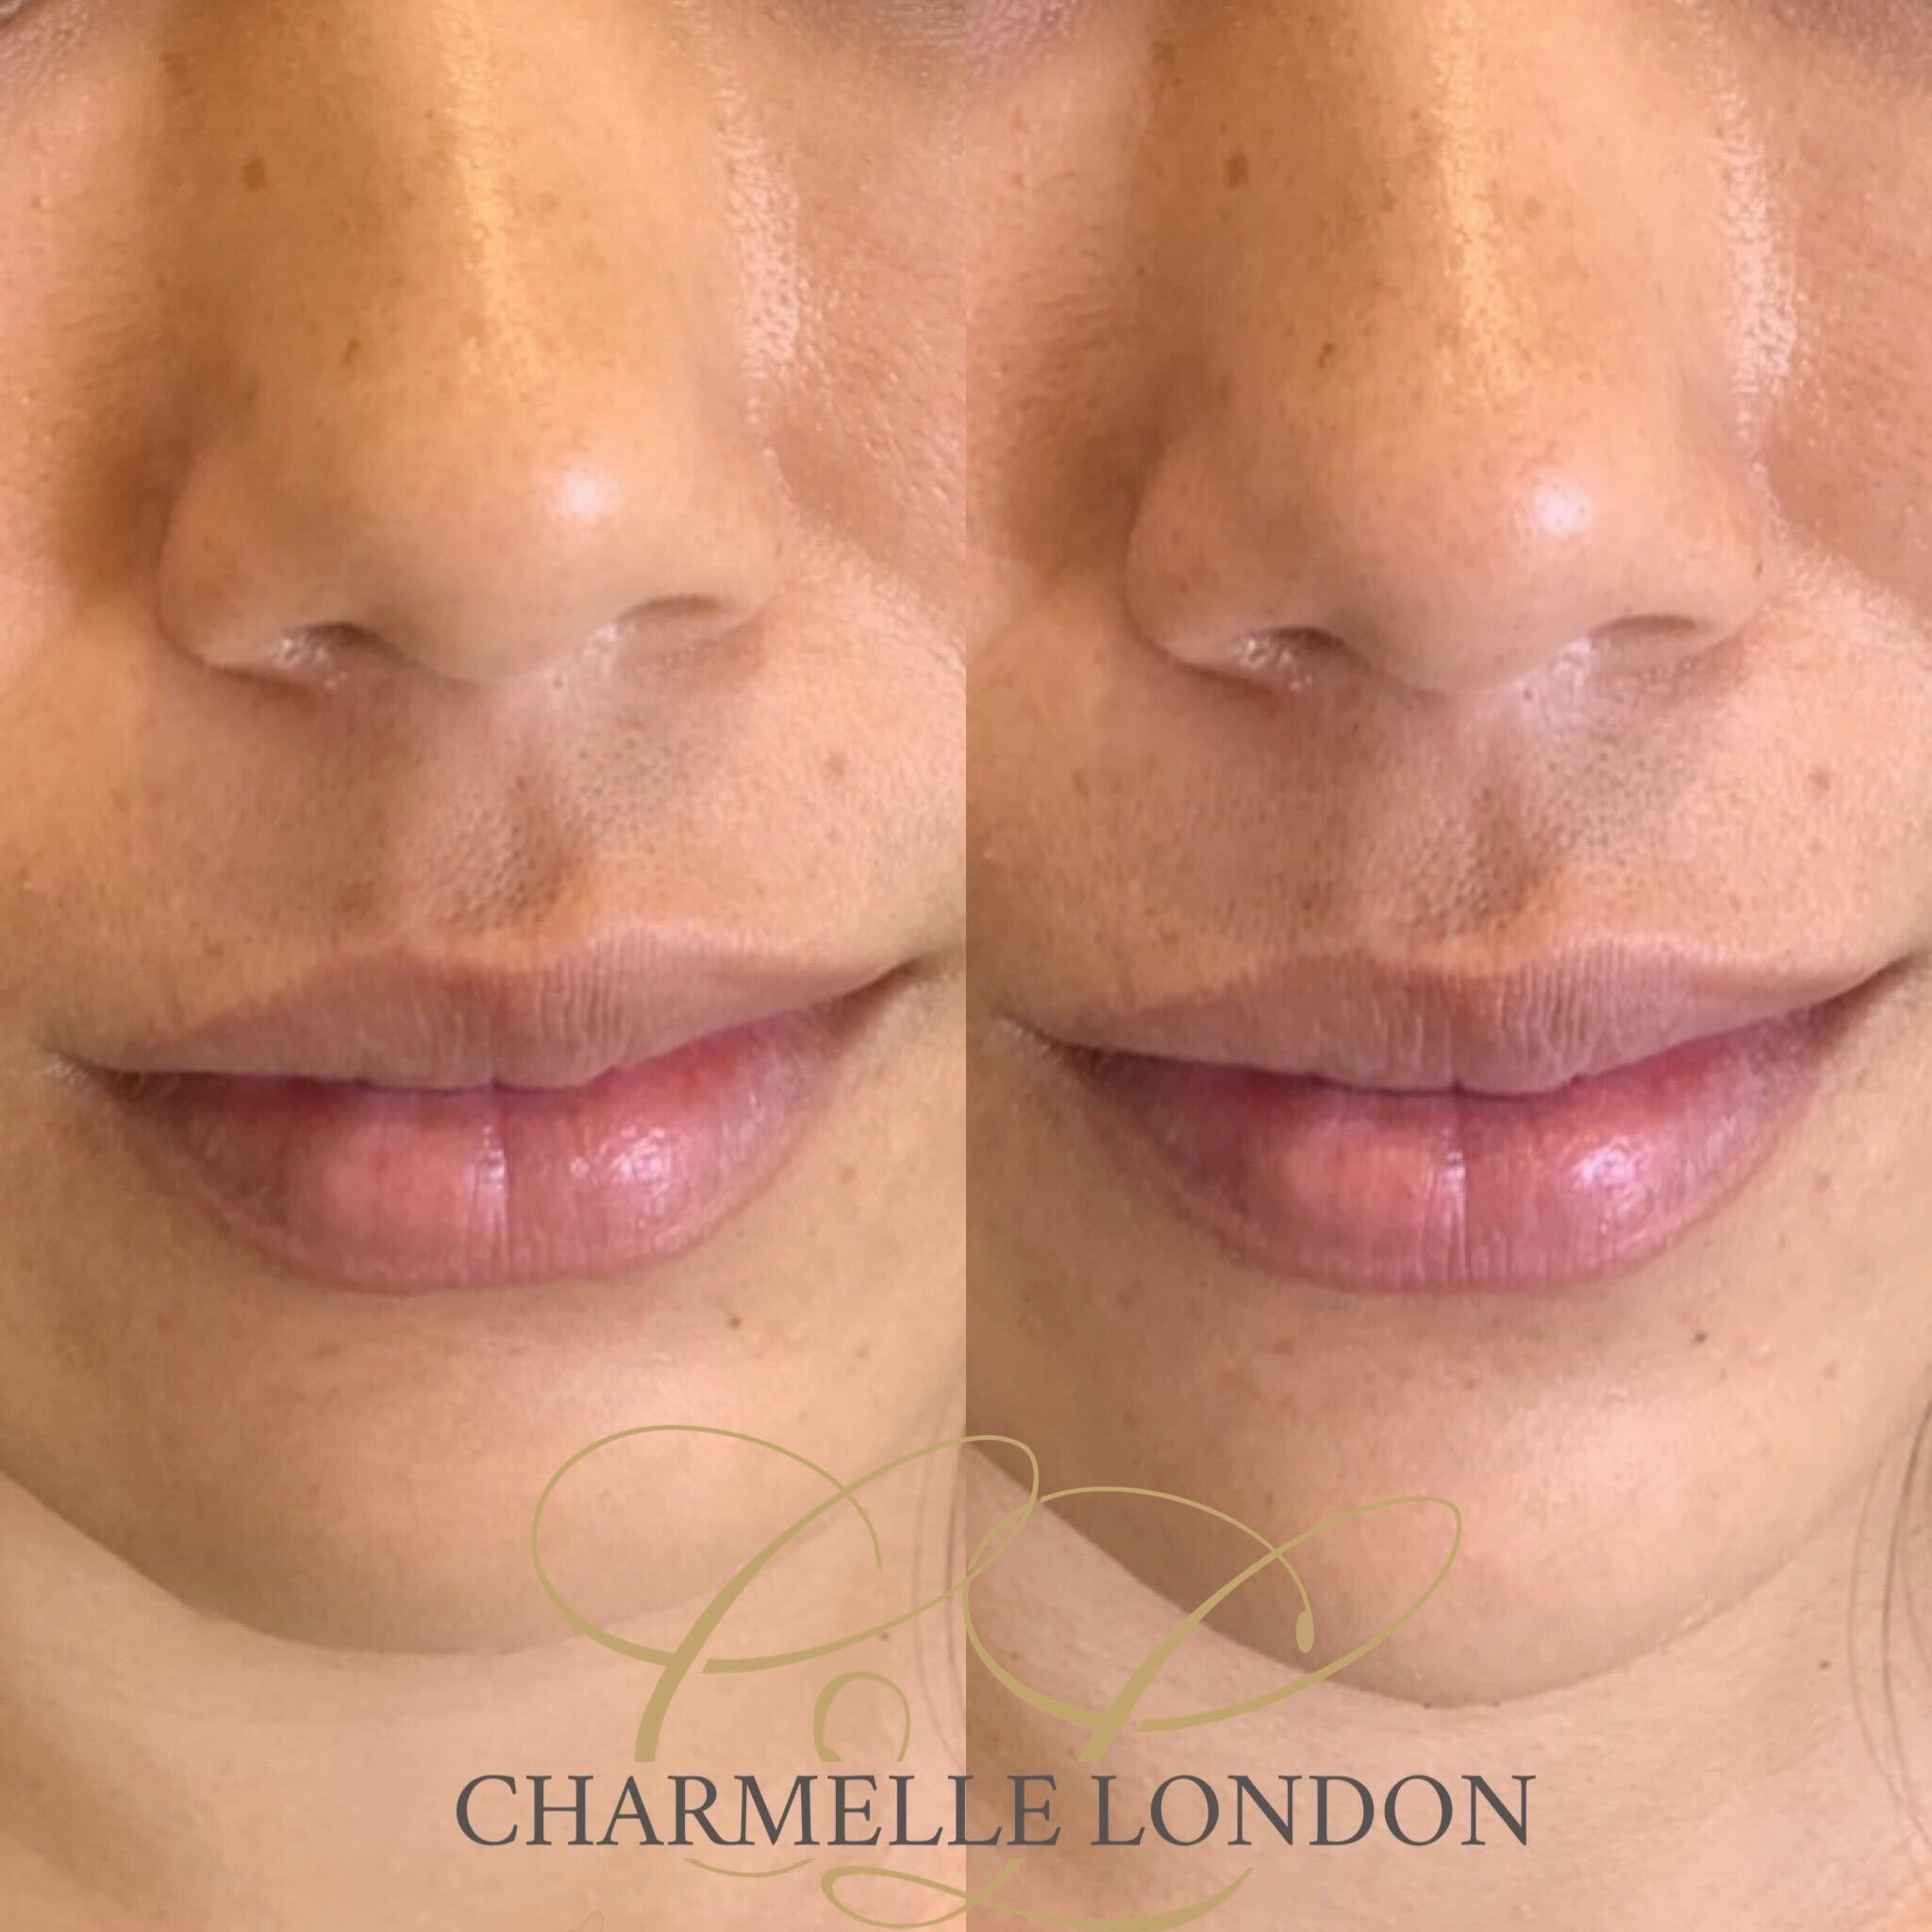 Charmelle London is one of London's leading specialists in providing subtle, natural-looking dermal filler enhancements that augment each individual’s features and introduce volume, hydration and defintion.

The passion of our specialists at Charmelle London is to deliver complete satisfaction to each and every client. Many of our clients we see routinely to keep their lips looking fabolously maintained.